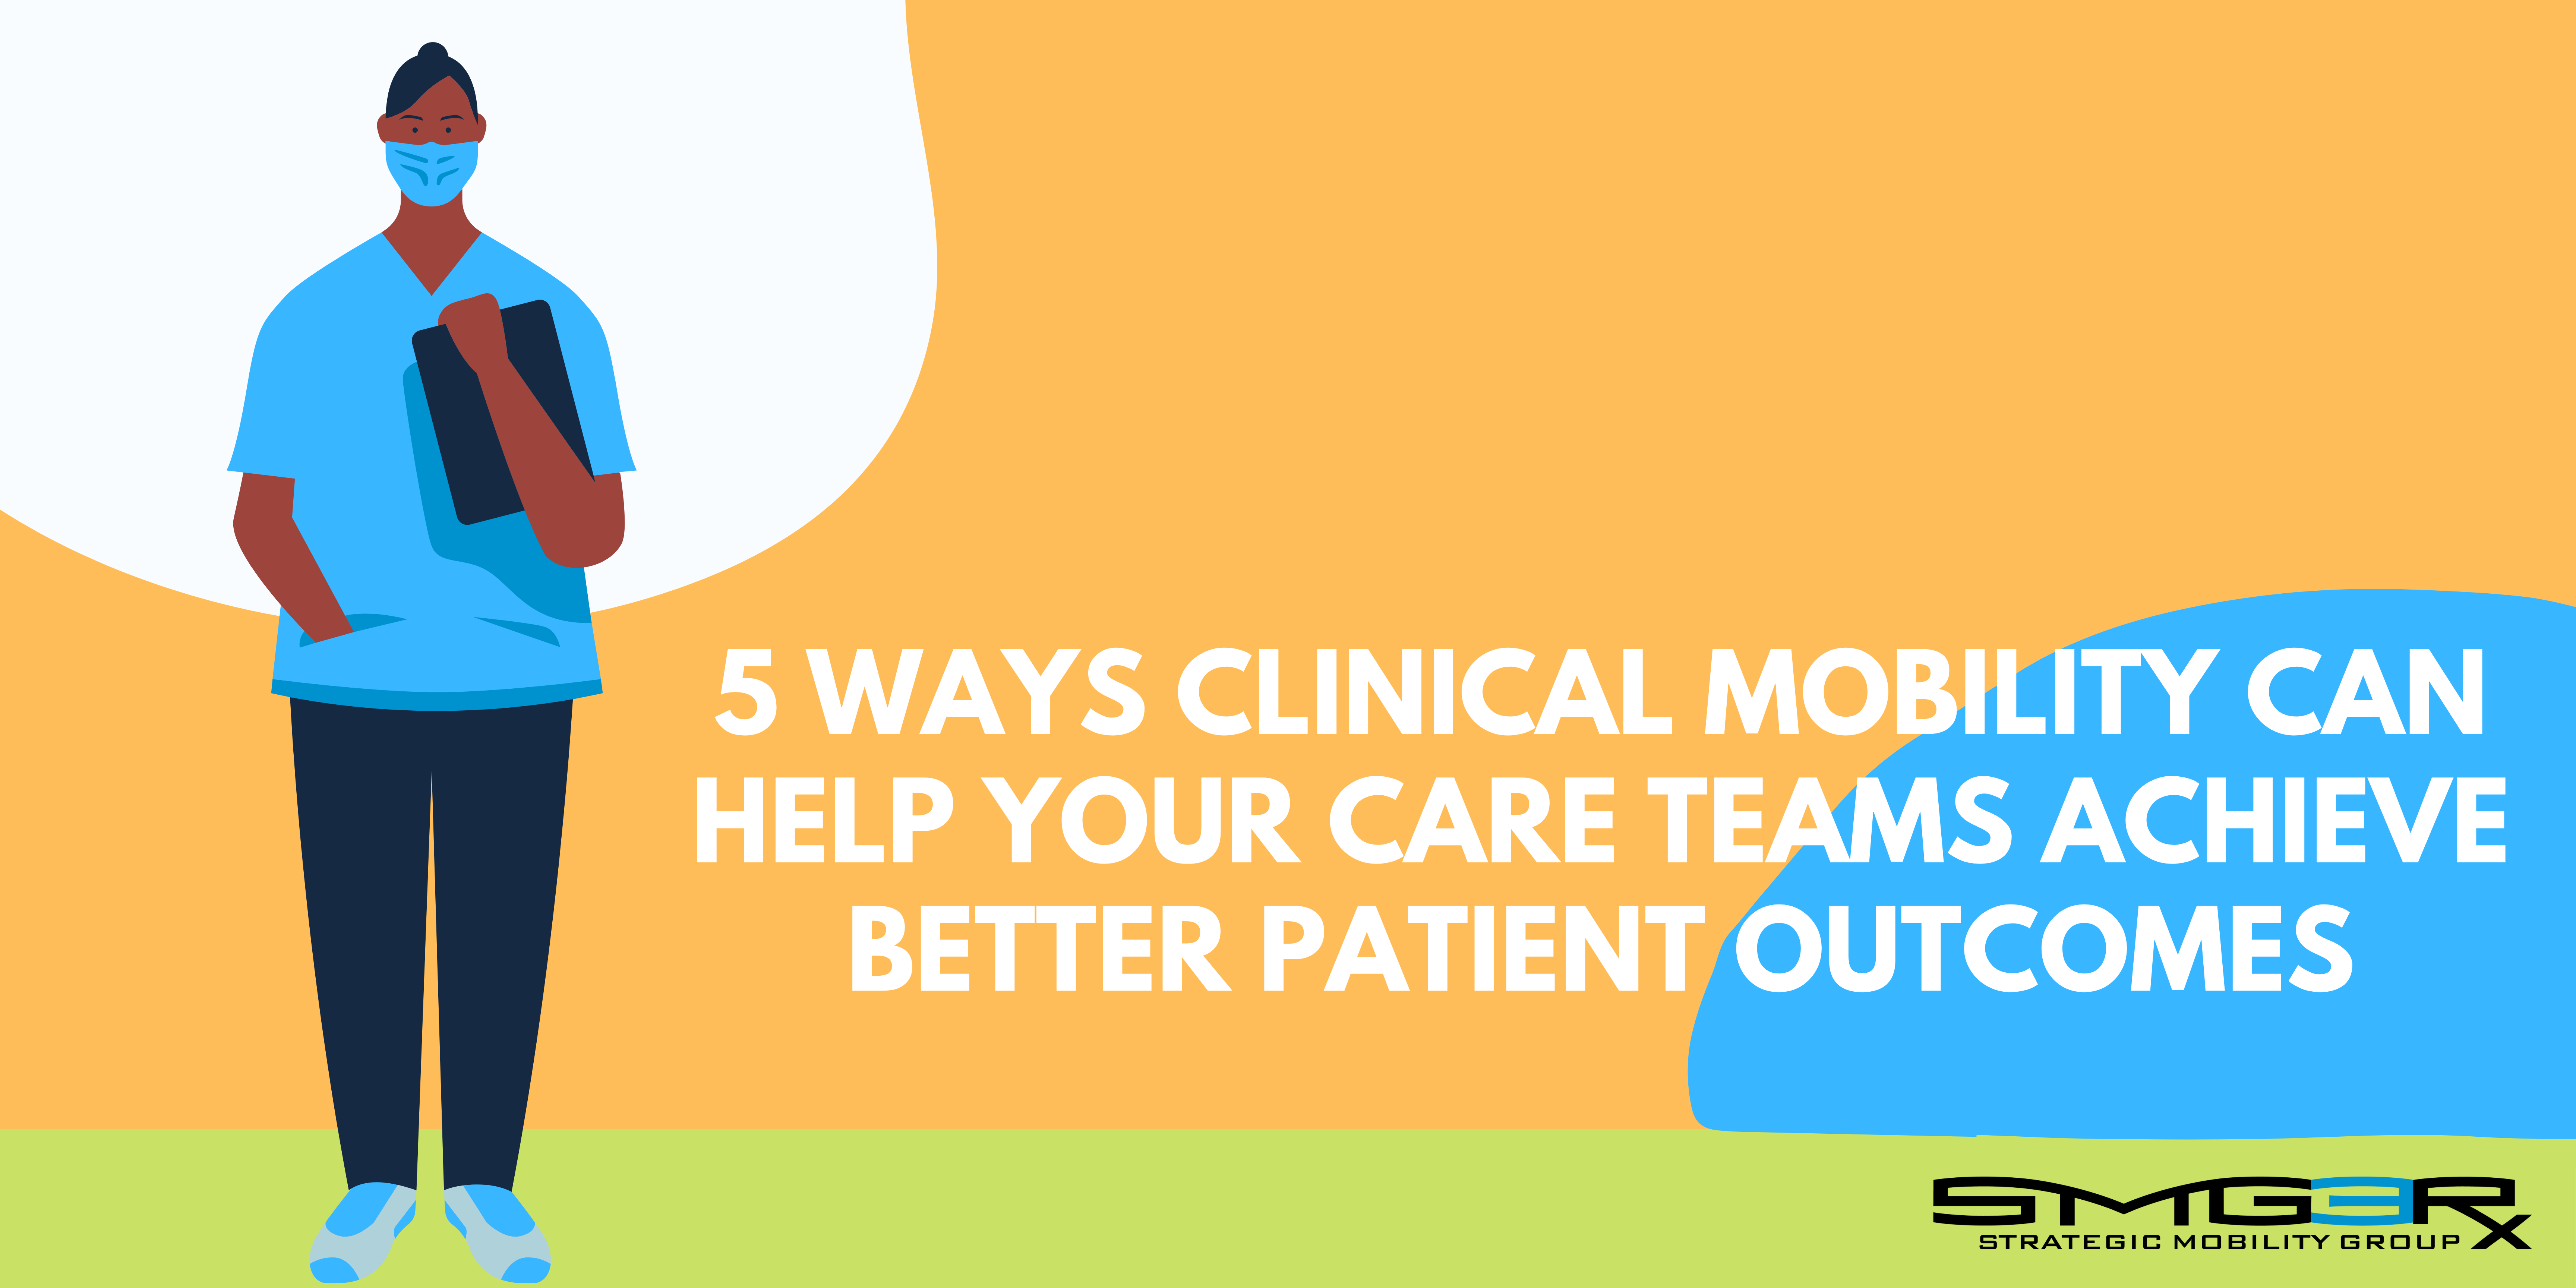 There’s a Simpler Way to Improve Patient Outcomes - The Answer is Enhanced Clinical Mobility Through Smartphones